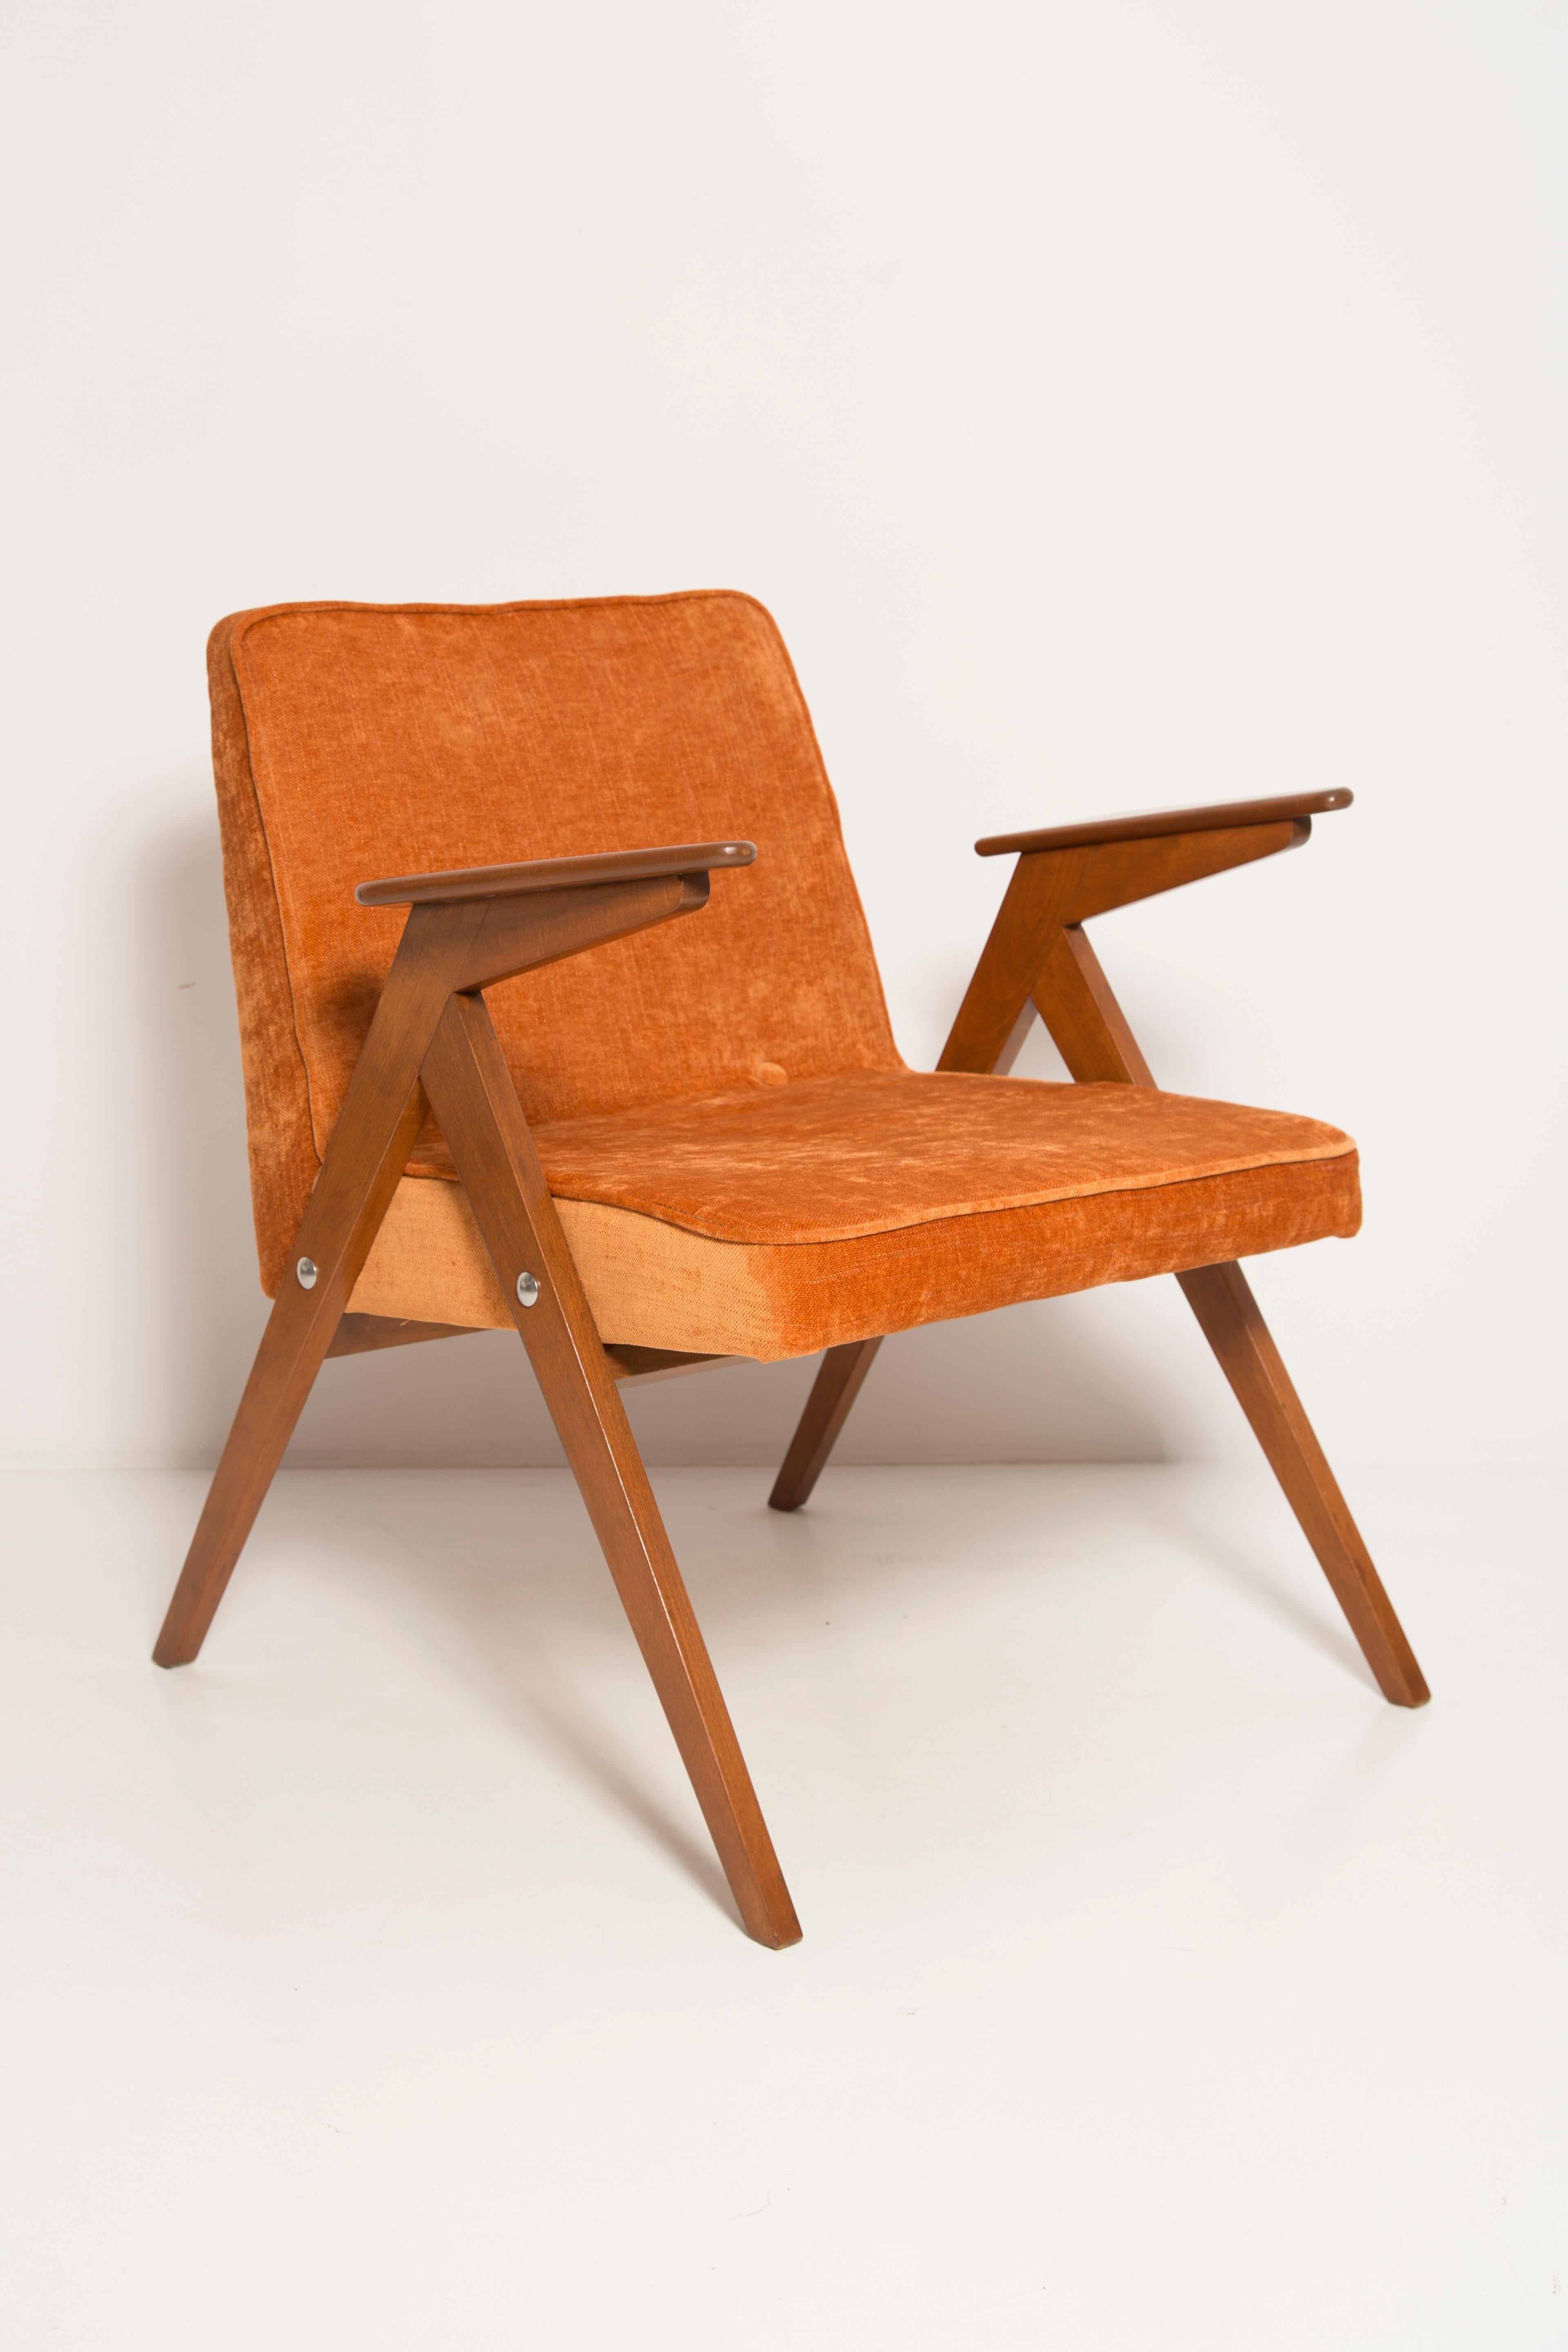 Textile Set of Two Midcentury Orange Bunny Armchairs by Jozef Chierowski, Poland, 1960s For Sale